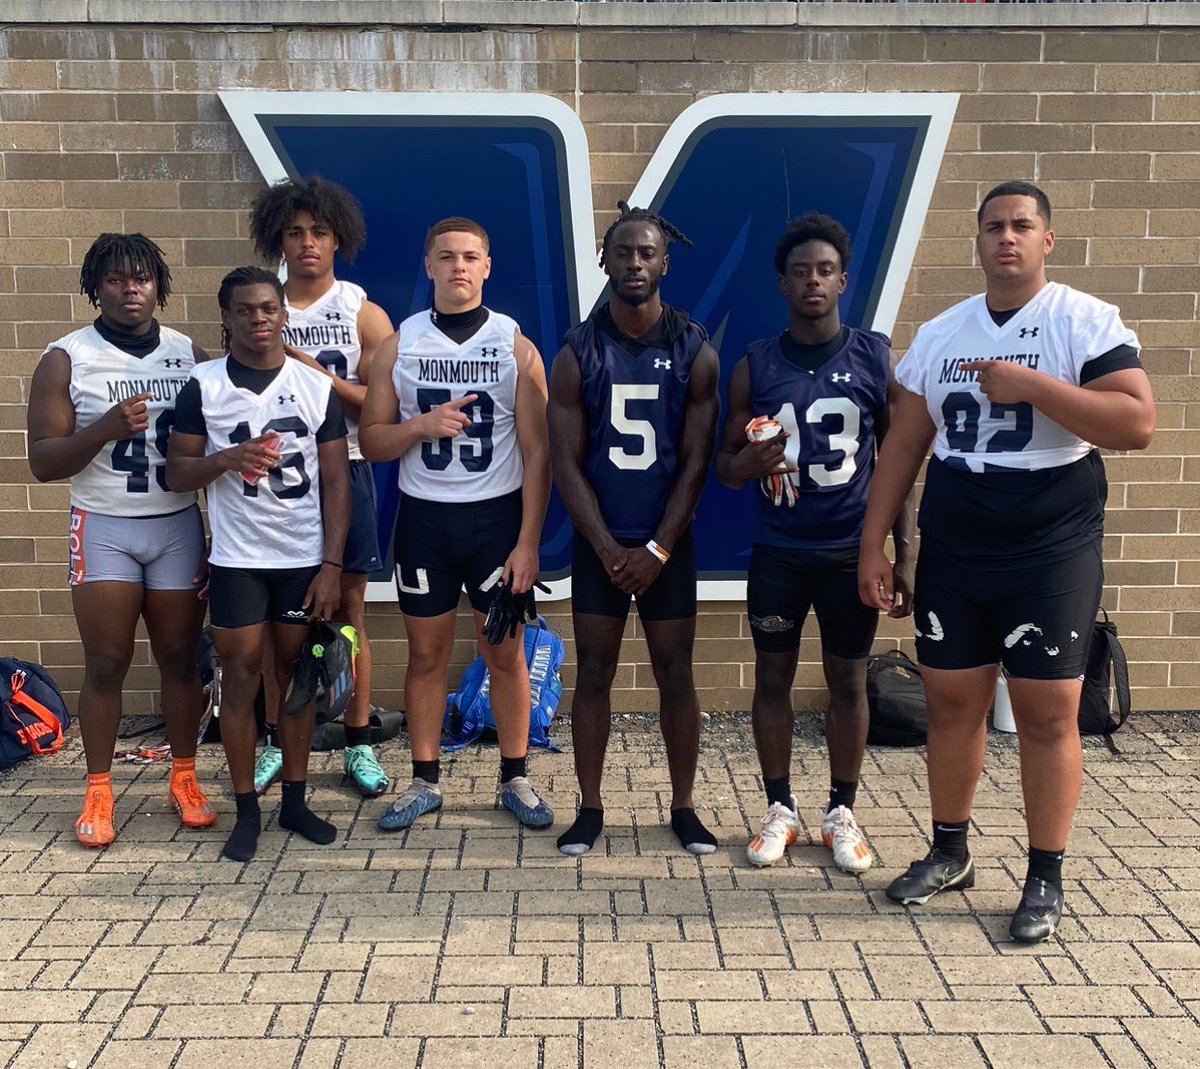 Always great seeing our guys representing, competing and showing everyone what they are about! #OBGLIFE @TBoltAthletics @millvillesuper @njgridiron_ @_GridironAccess @Mtrible